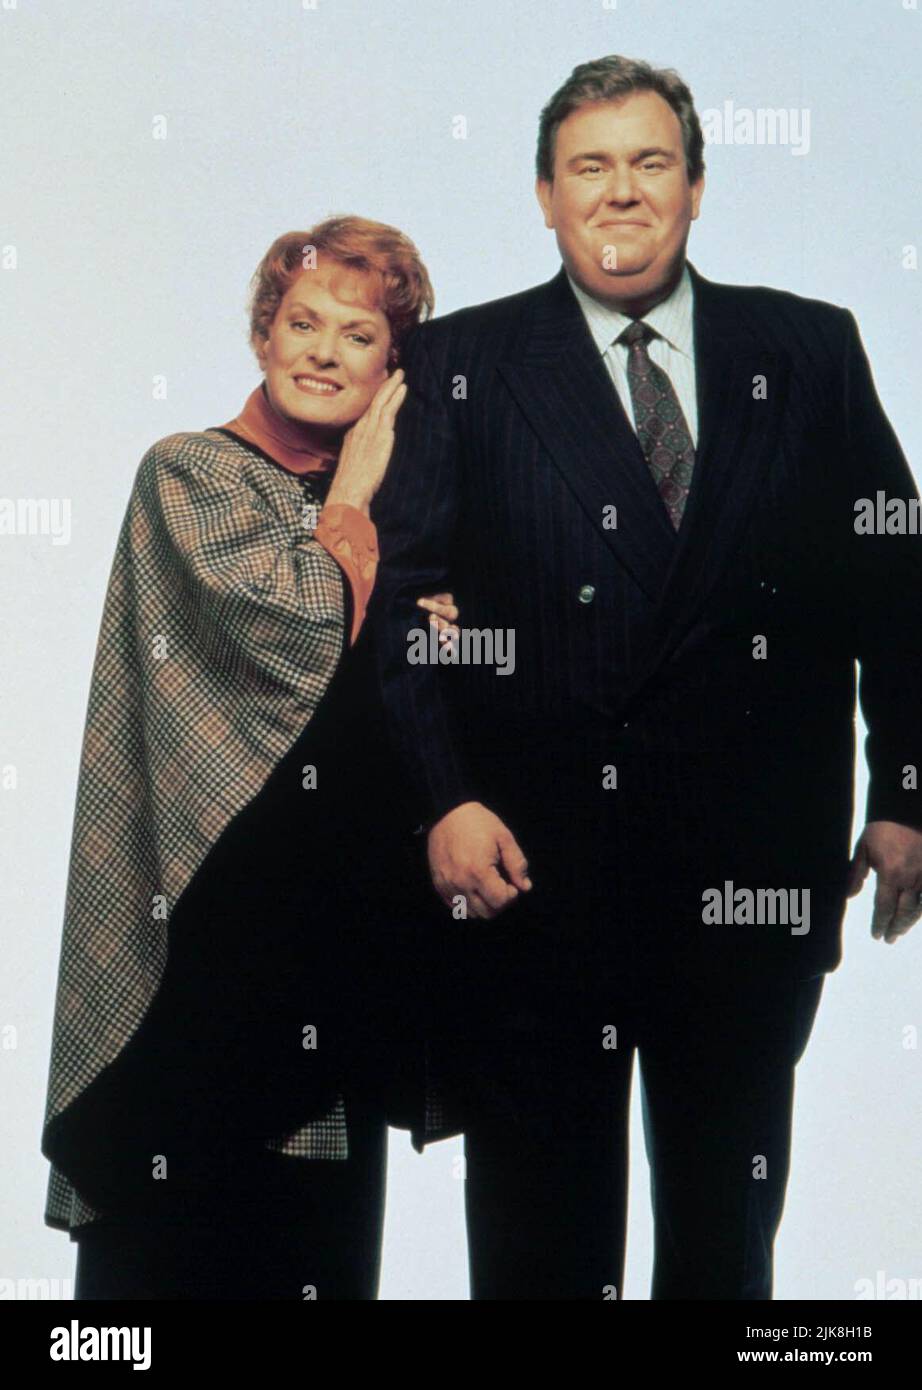 Maureen O'Hara & John Candy Film: Only The Lonely (USA 1991) Characters:  Rose Muldoon & Danny Muldoon Director: Chris Columbus 24 May 1991  **WARNING** This Photograph is for editorial use only and